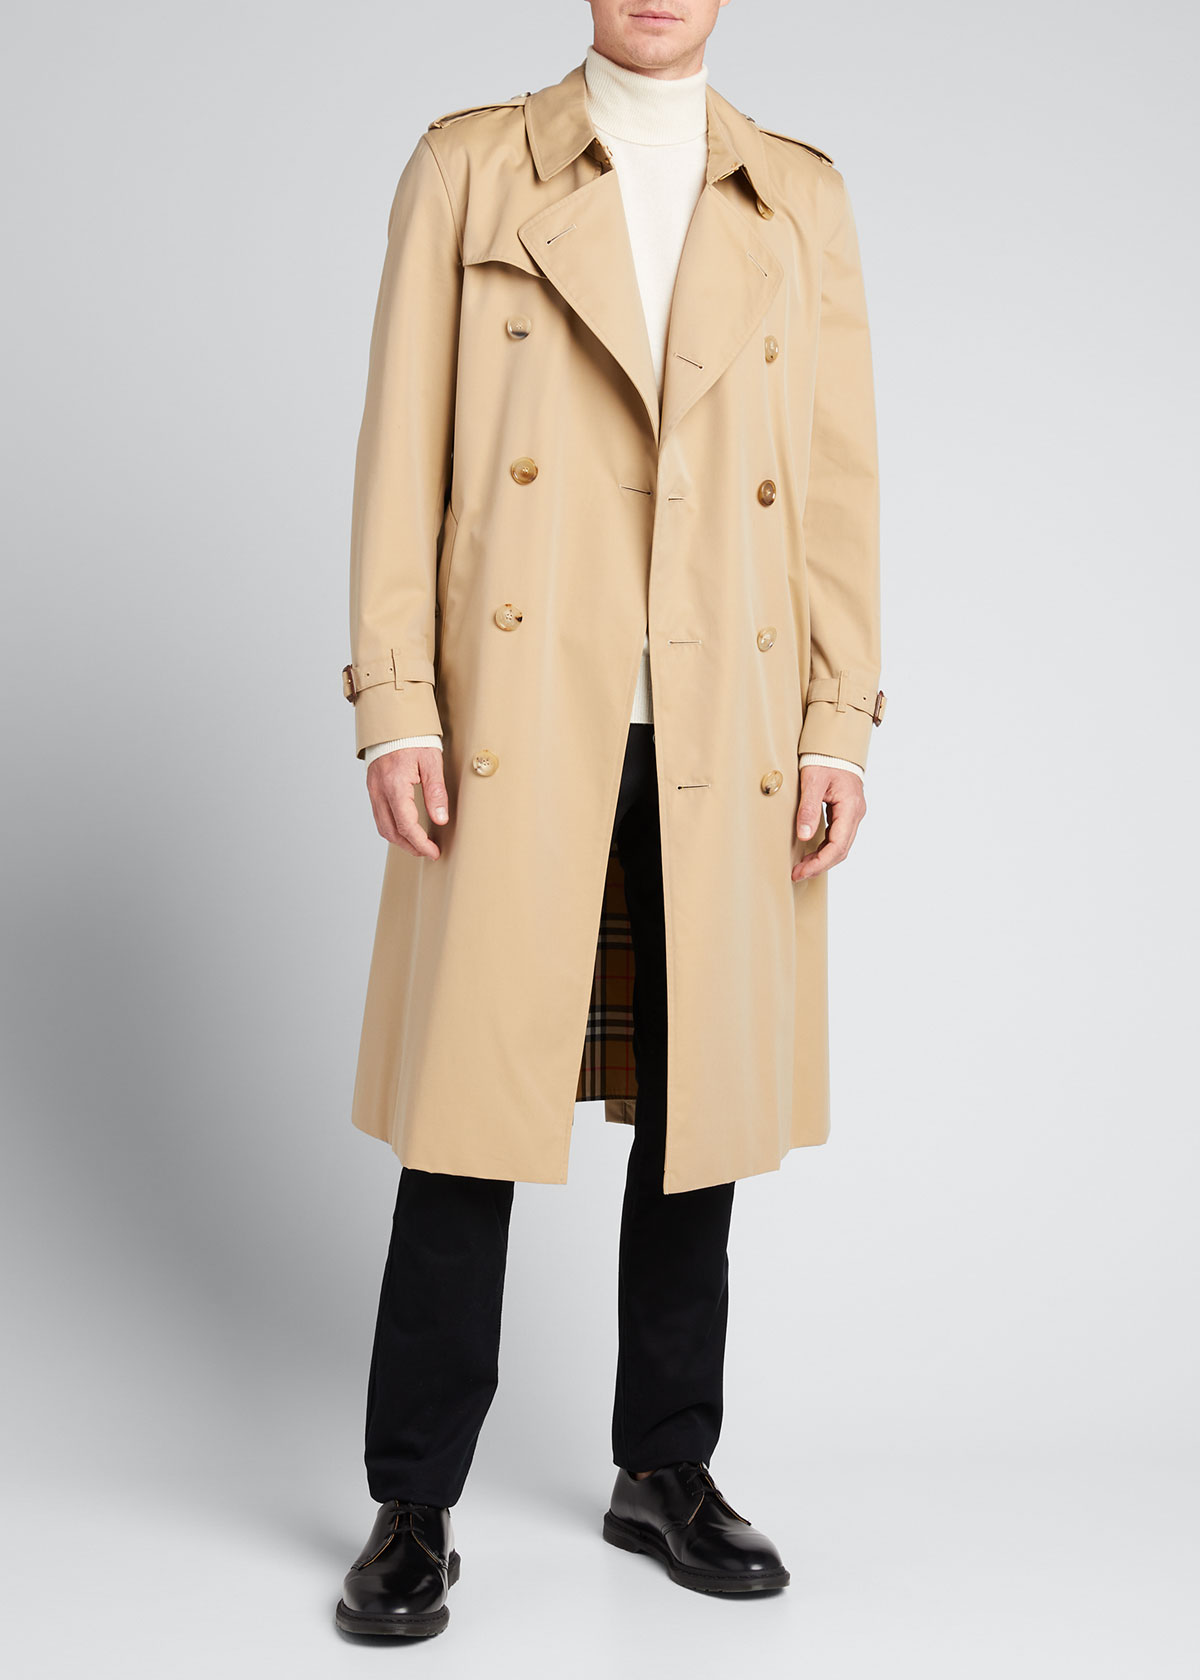 Review: Burberry trench coat vs other trench coat | PurseForum